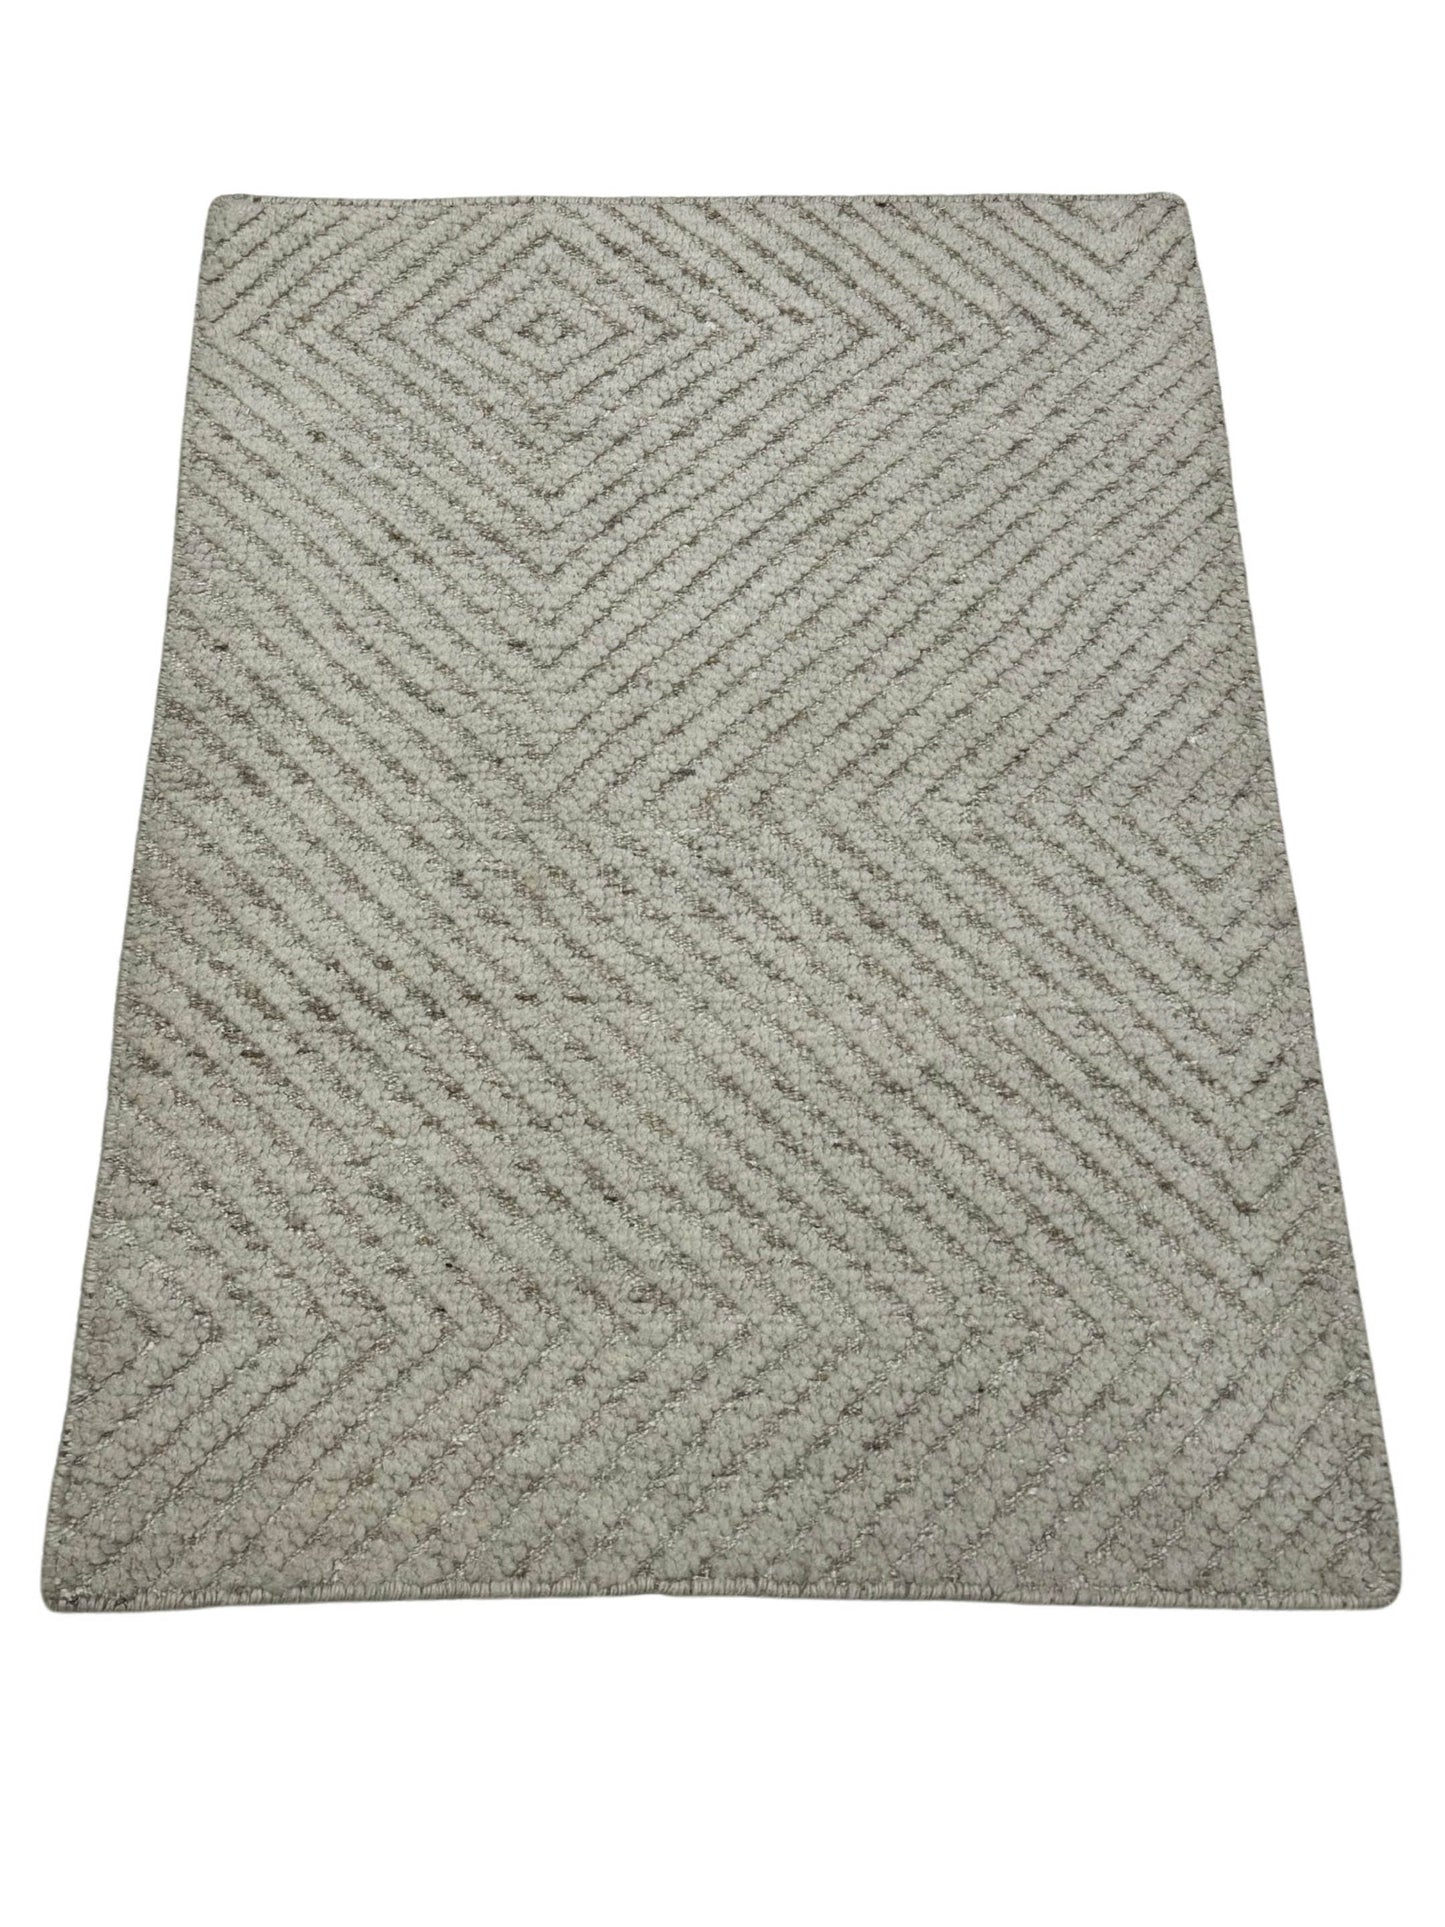 Artisan Harmony  White  Transitional Knotted Rug